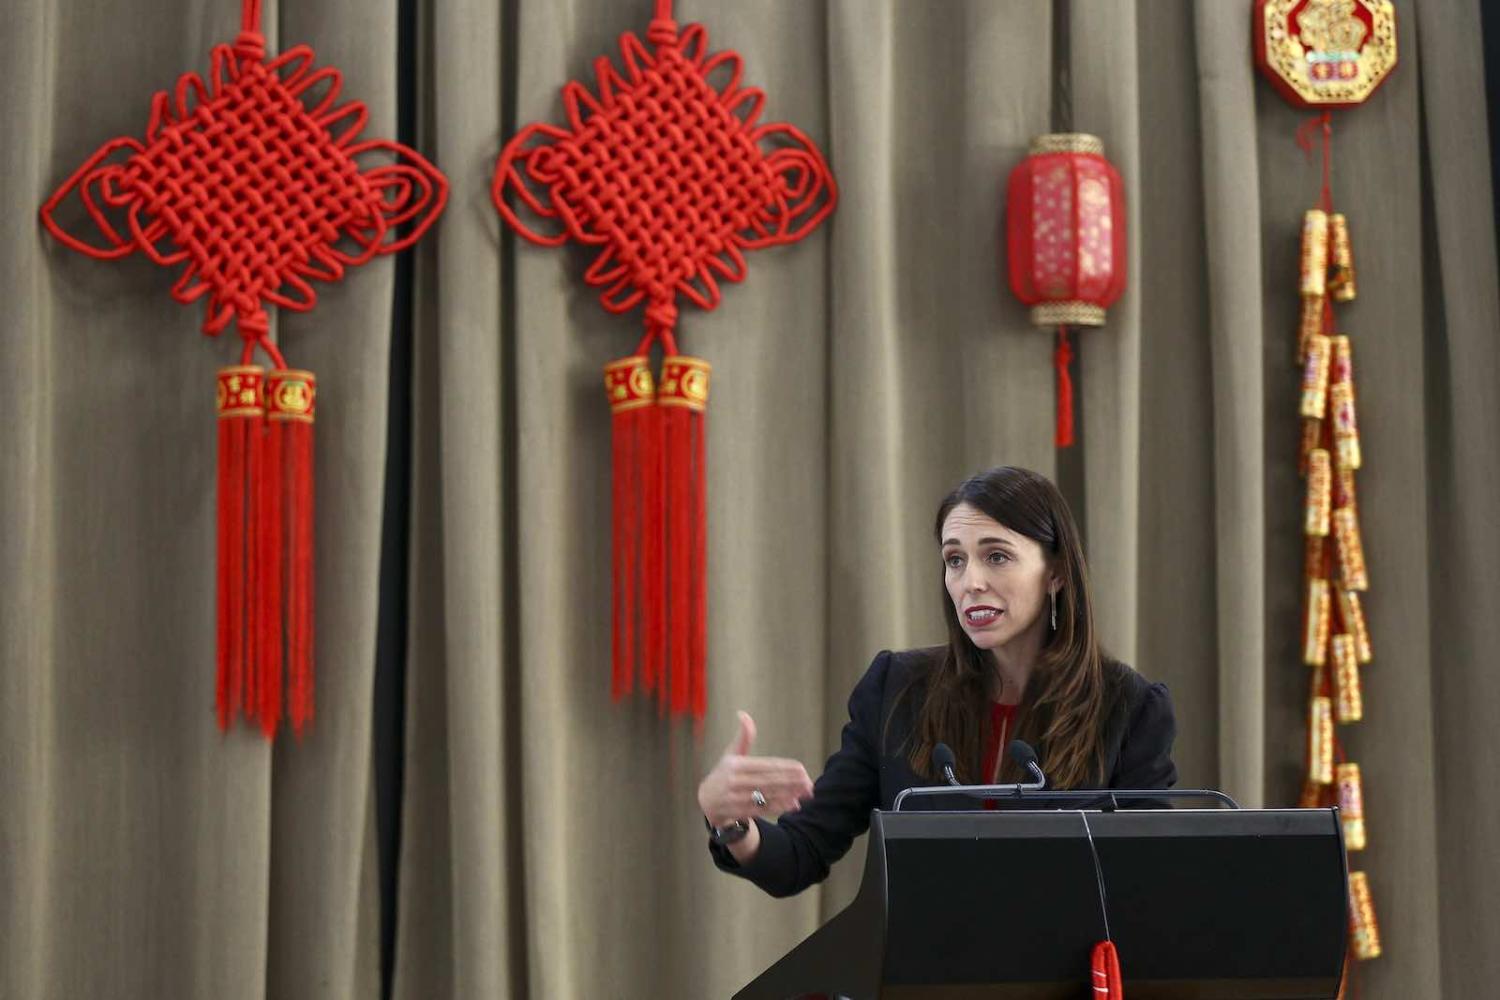 New Zealand Prime Minister Jacinda Ardern speaks during a Chinese New Year celebration in February in Wellington, New Zealand (Hagen Hopkins/Getty Images)